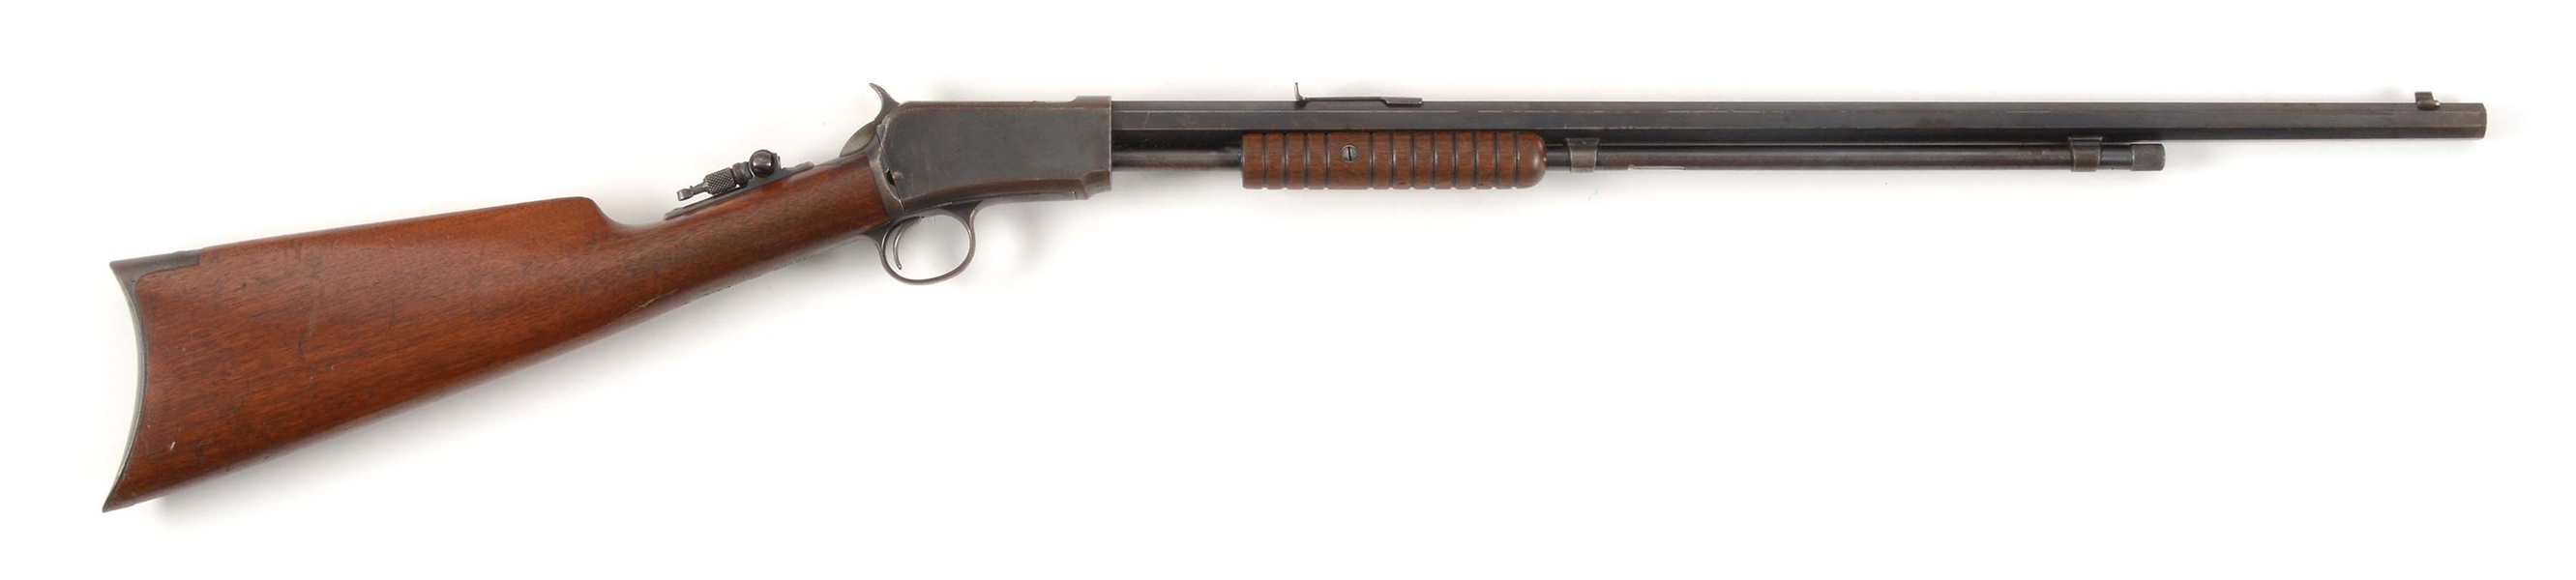 (C) WINCHESTER 1890 SLIDE ACTION RIFLE. 